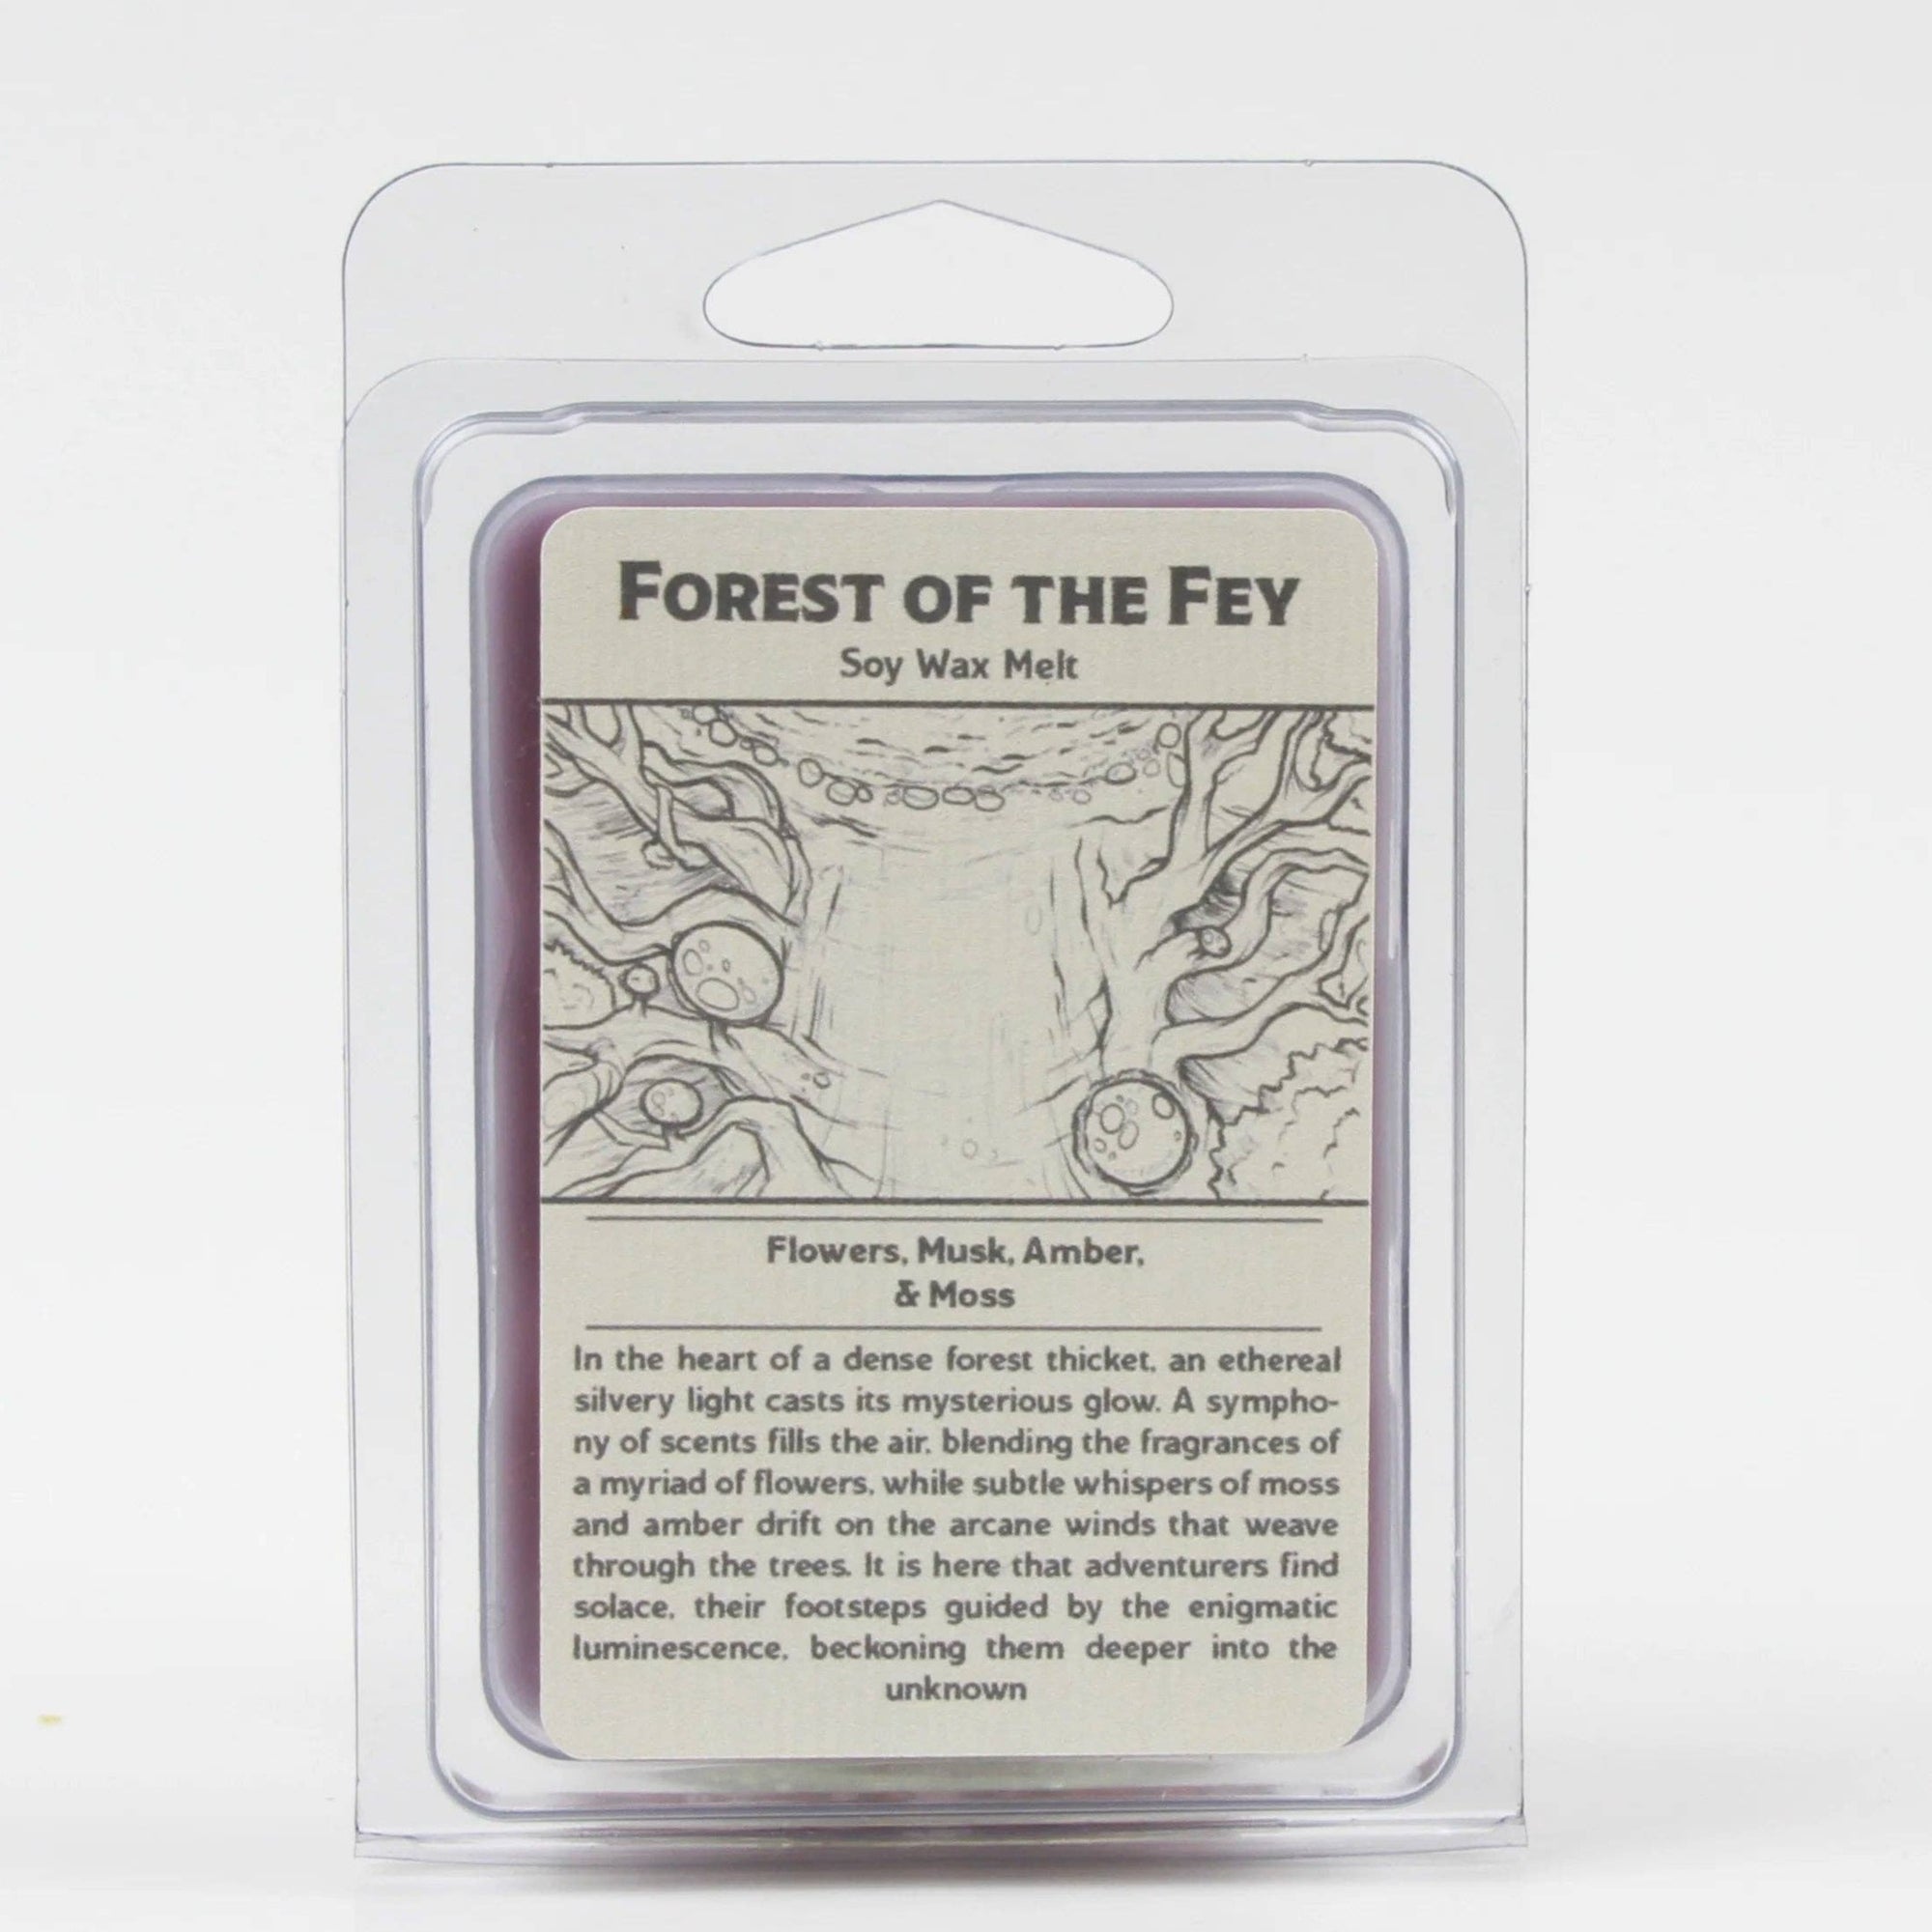 Forest of the Fey - Wax Melt Scent Notes: Flowers, Musk, Amber, & Moss